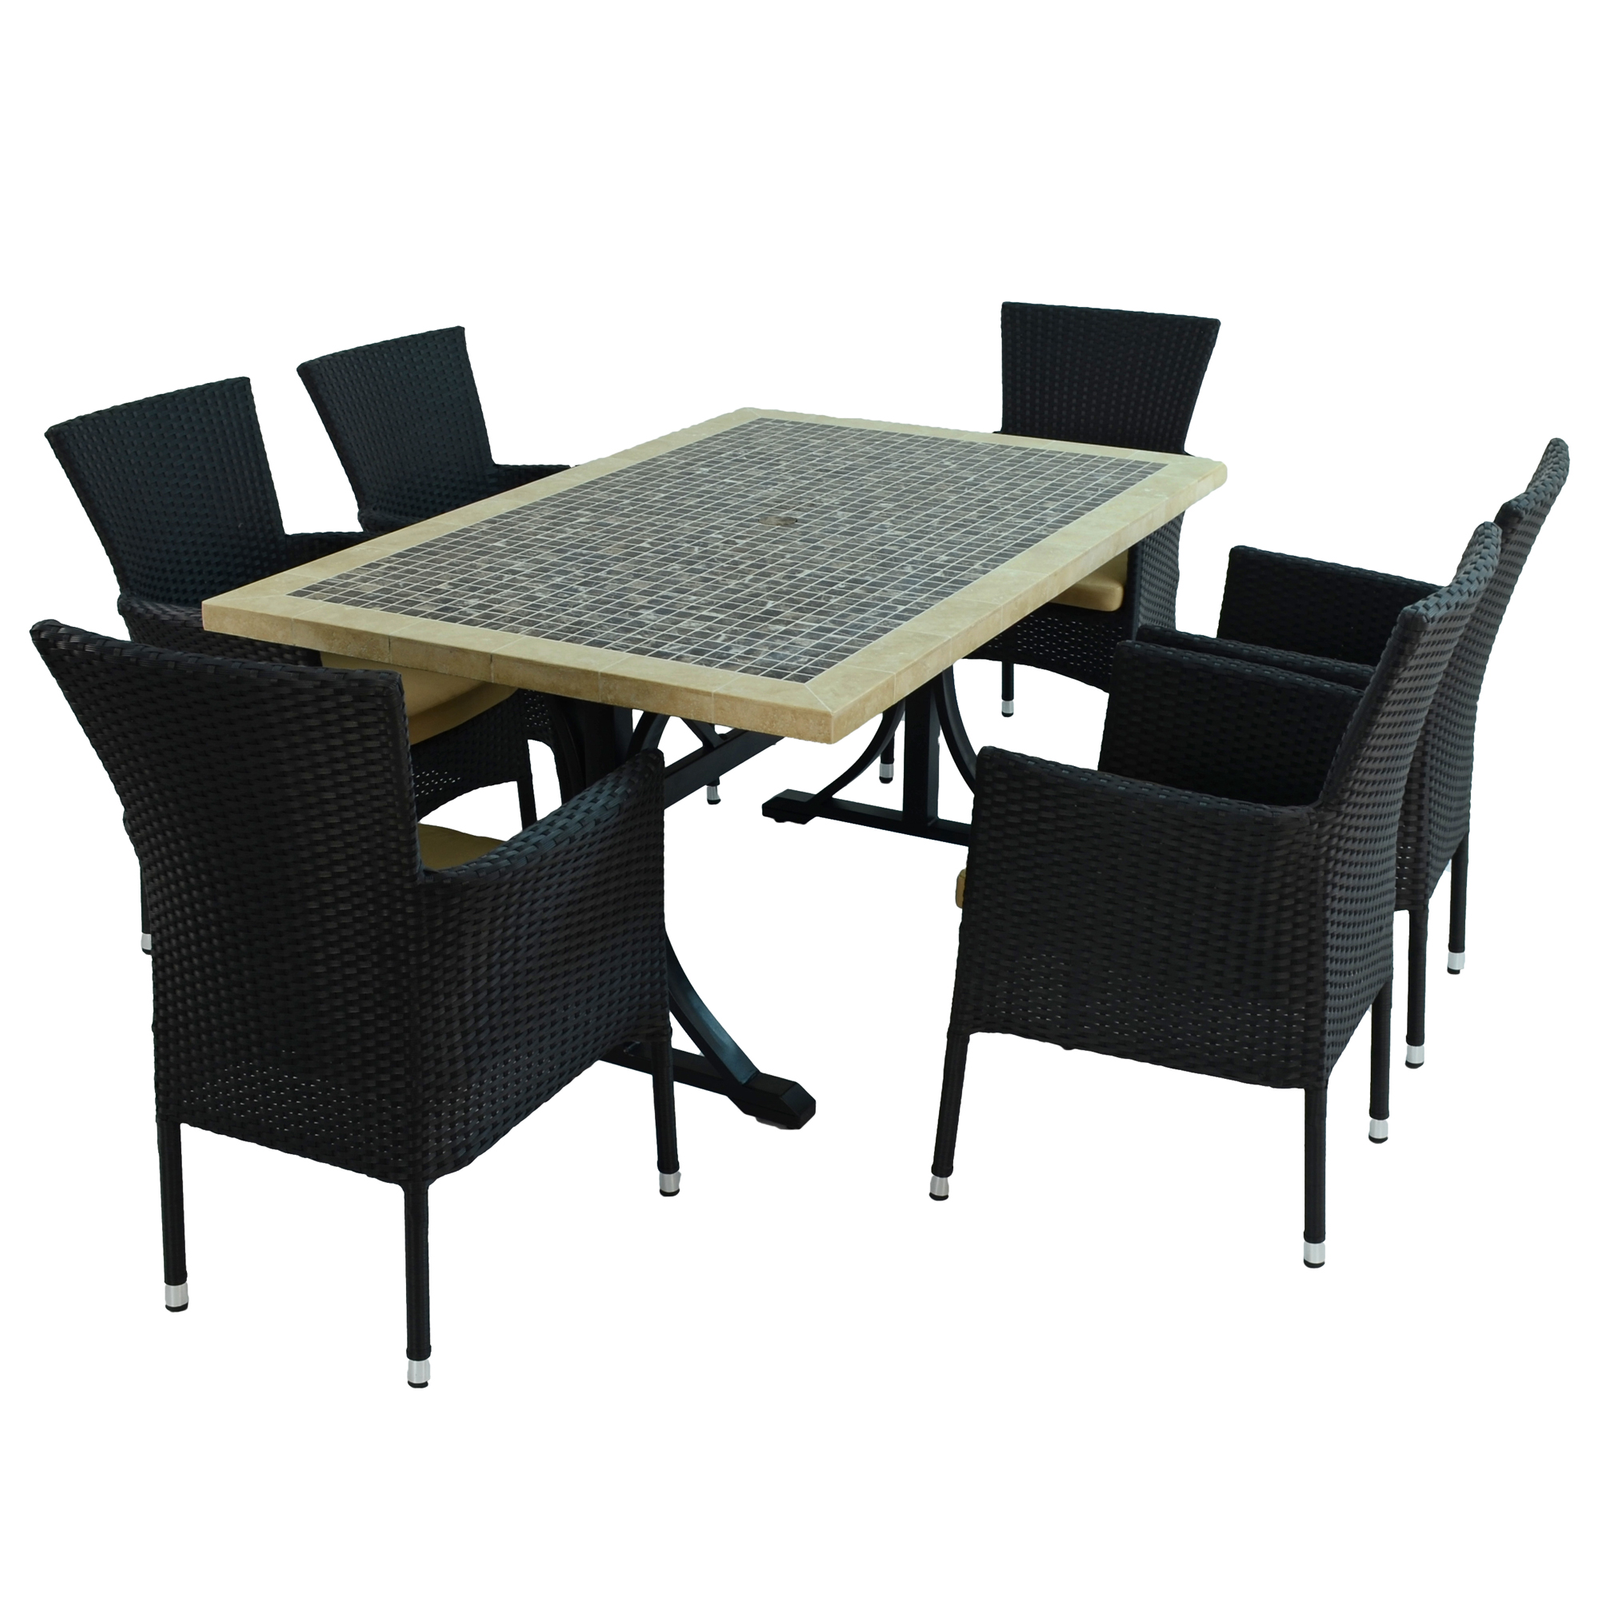 Byron Manor Wilmington Mosaic Stone Garden Dining Table With 6 Stockholm Black Wicker Chairs Dining Sets Byron Manor   